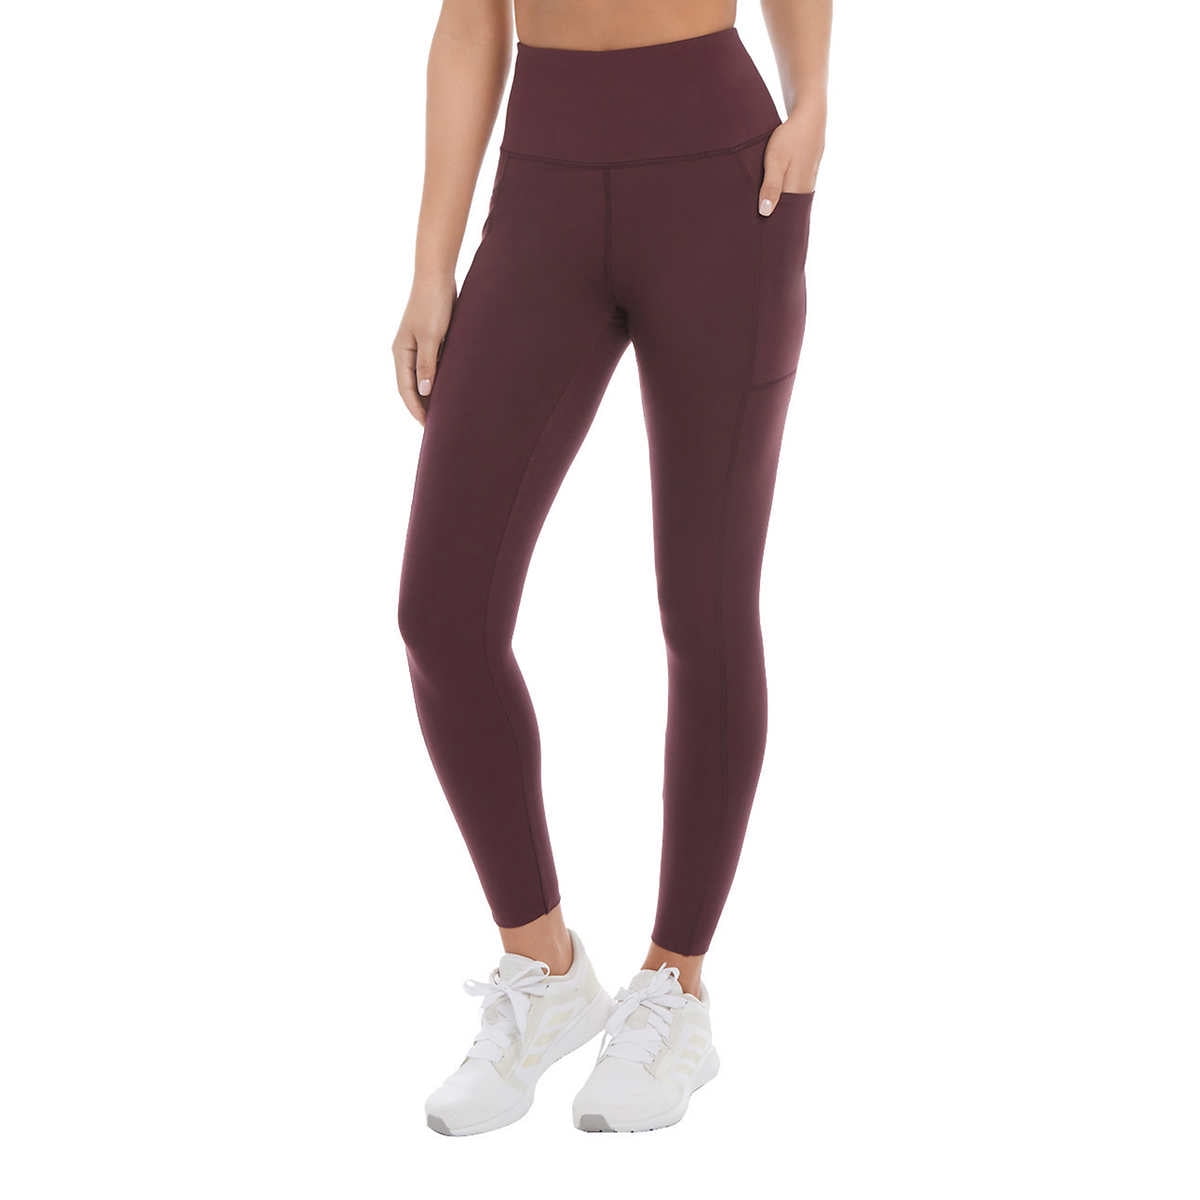 Danskin Purple Tight XL With Pockets High Rise Soft Brushed Fabric Ladies